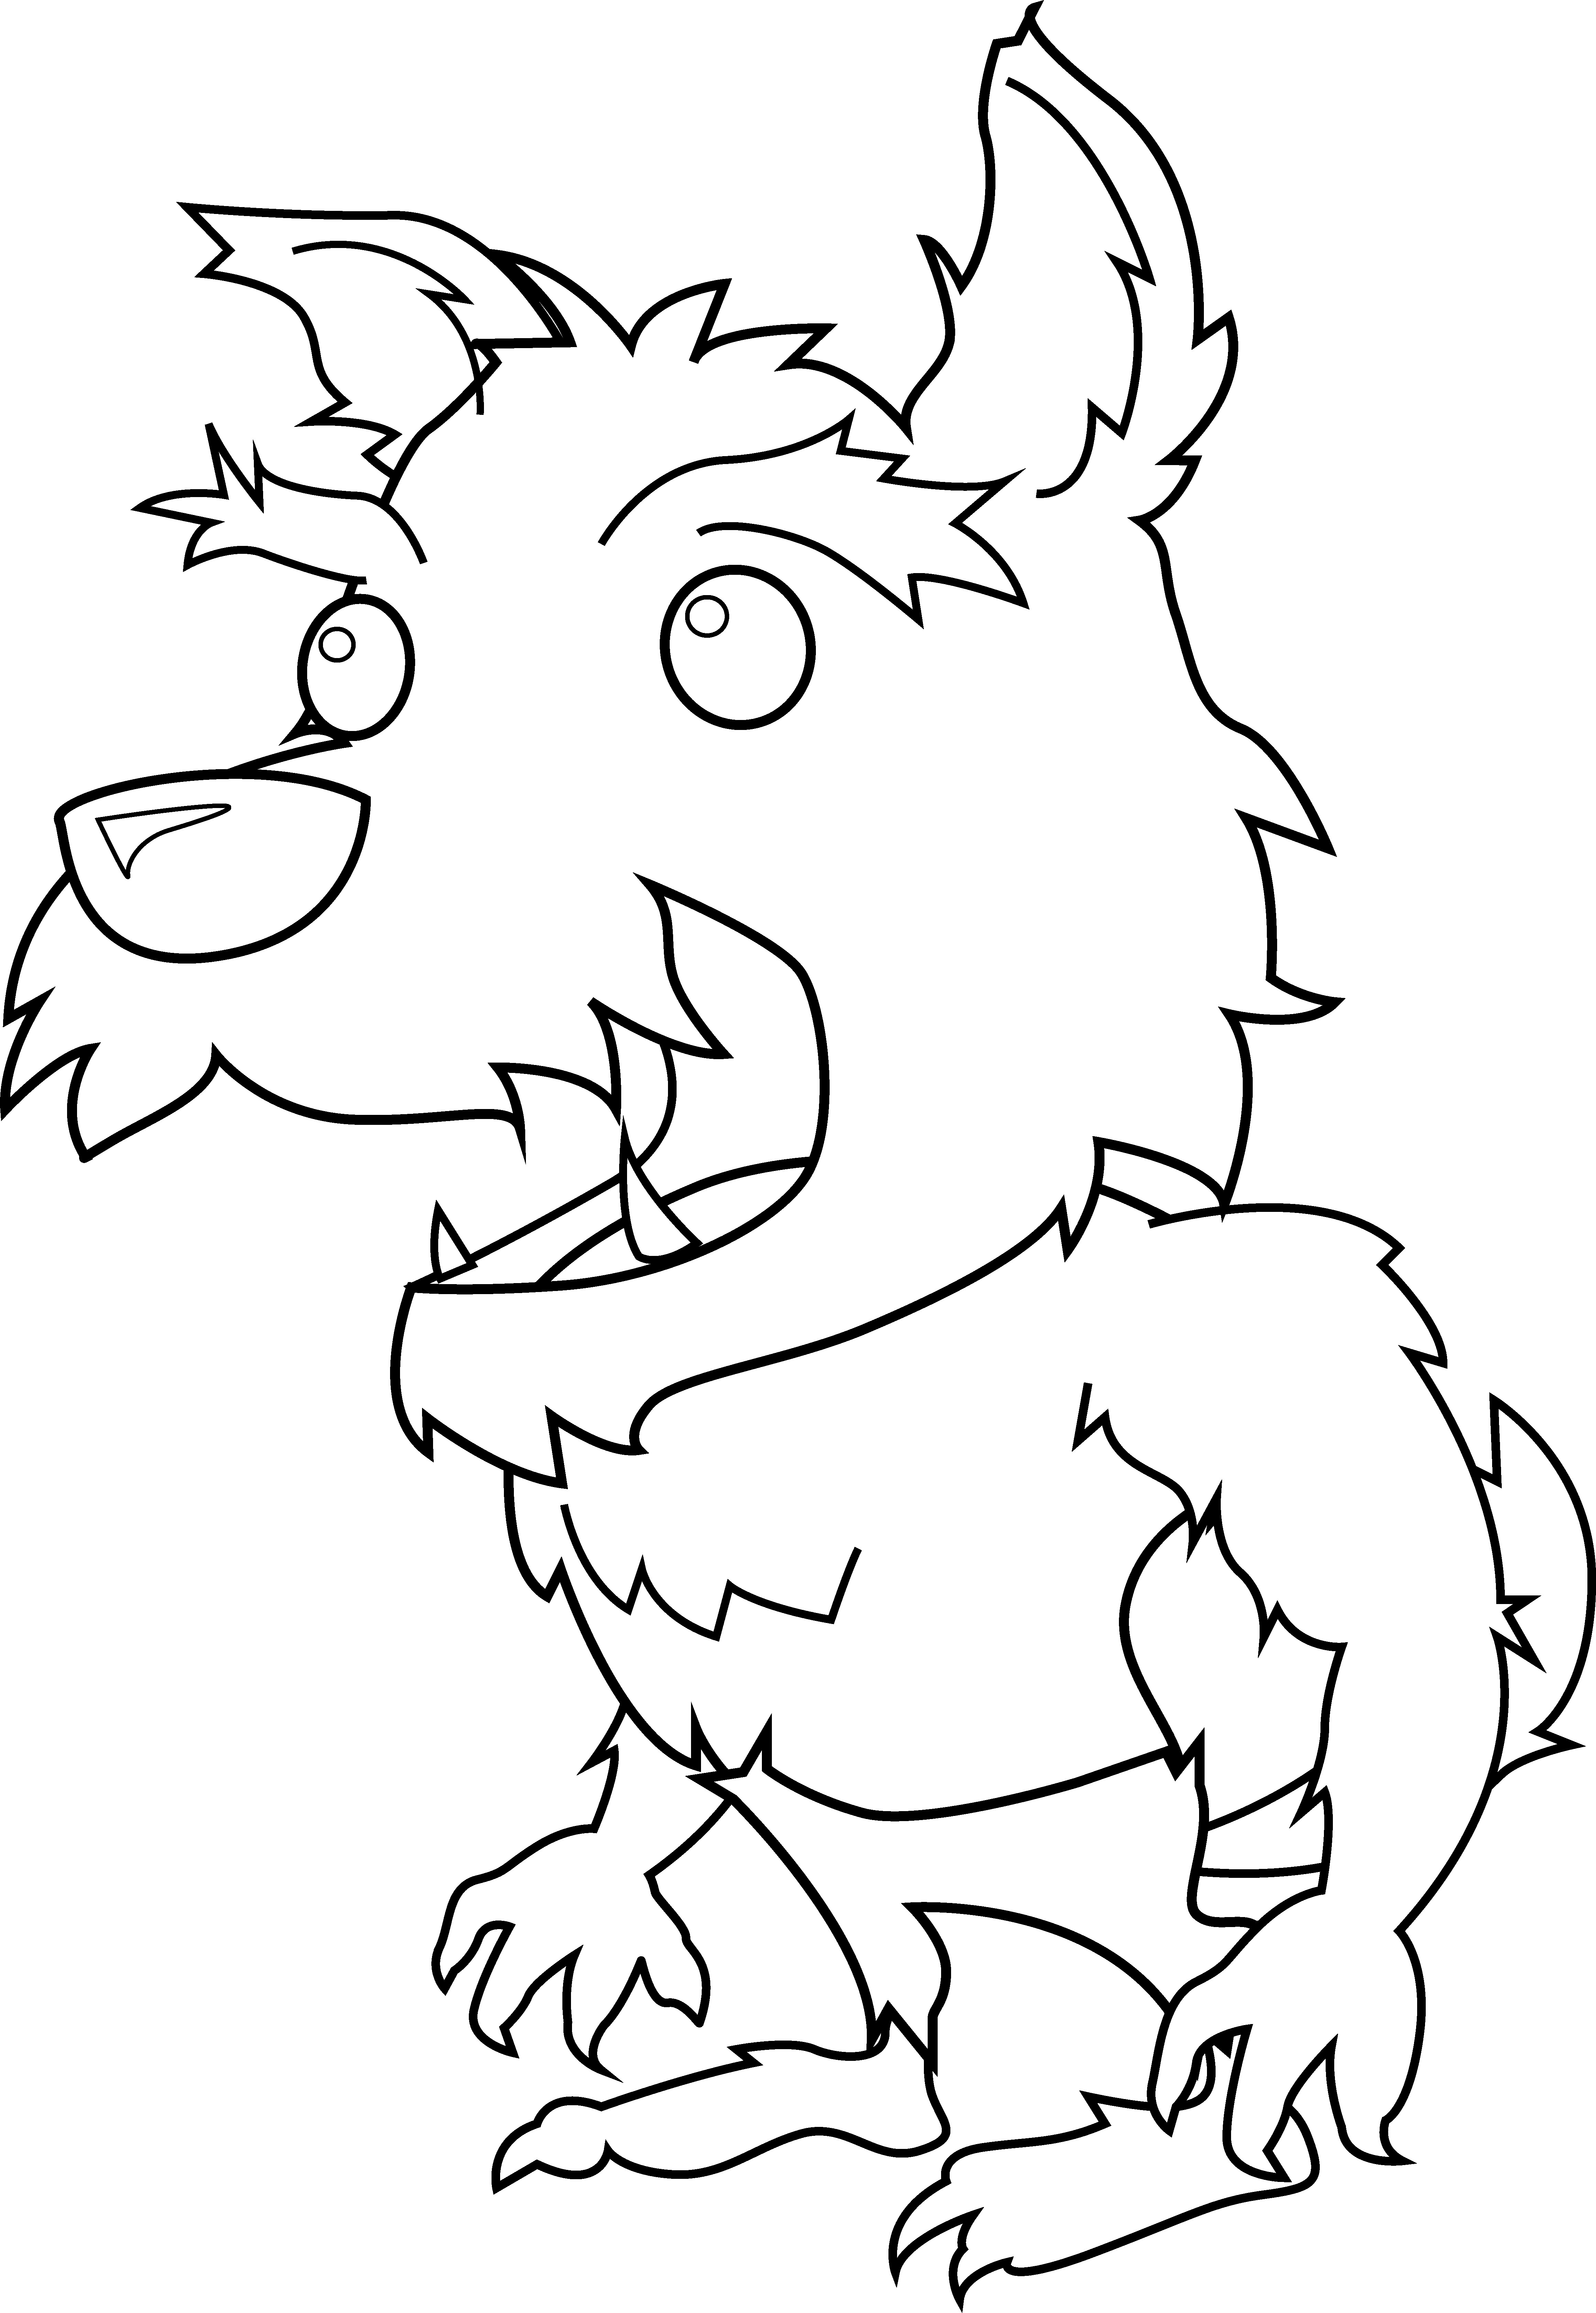 Scary Little Werewolf Coloring Page - Free Clip Art